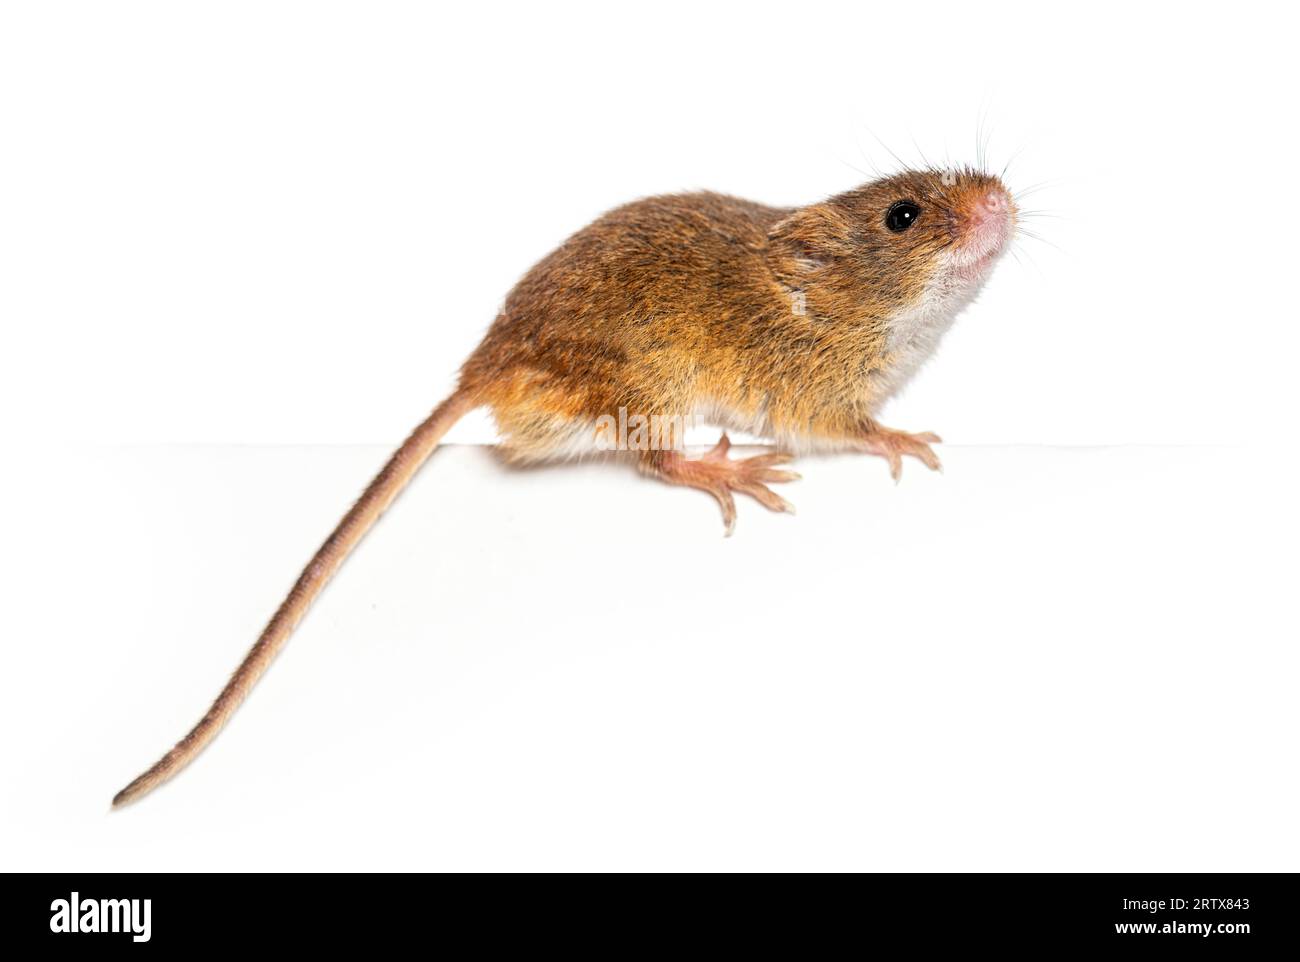 Harvest mouse, Micromys minutus, balancing on an edge, isolated on white Stock Photo